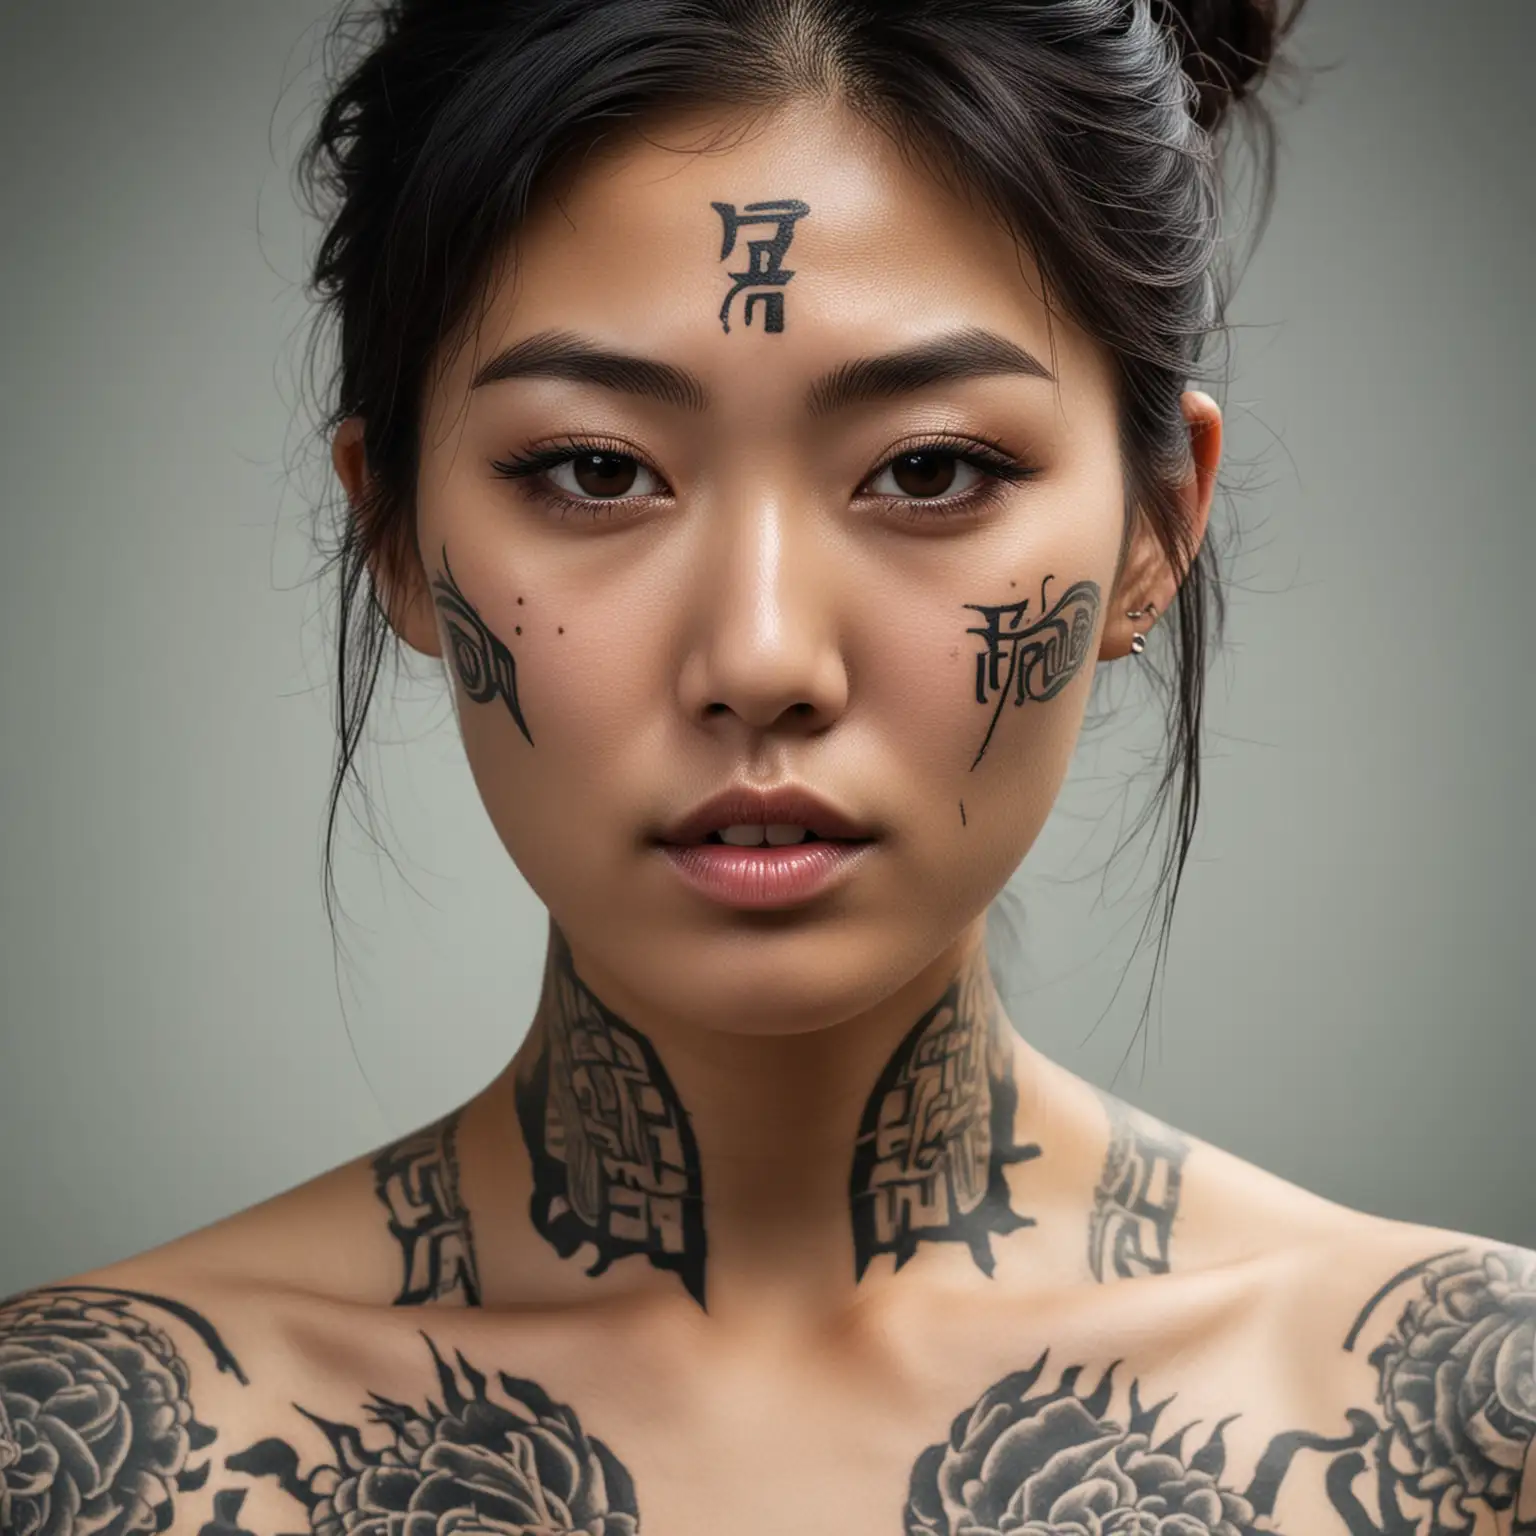 Korean Woman with Bold Face Tattoos Exhibiting Fierce Expression